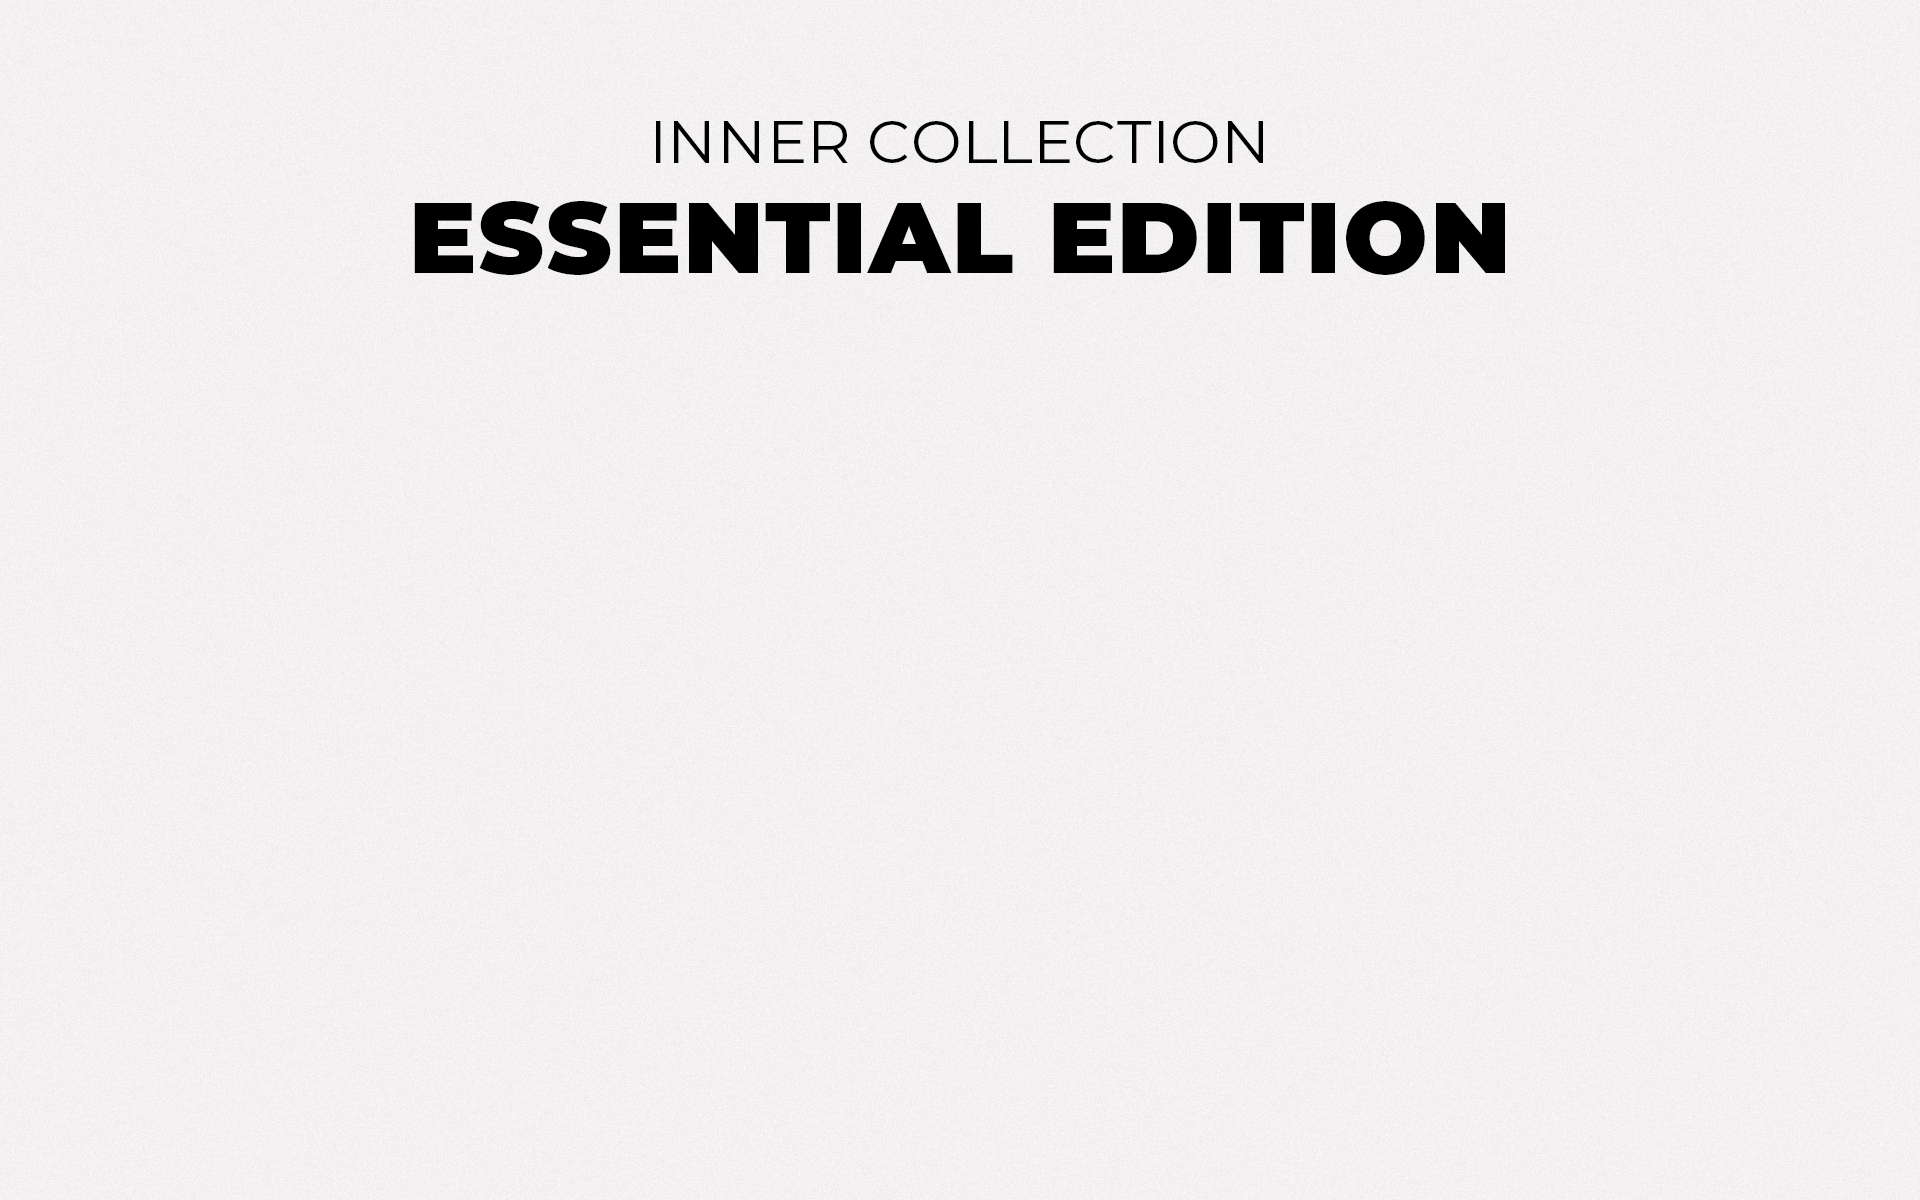 INNER COLLECTION ESSENTIAL EDITION